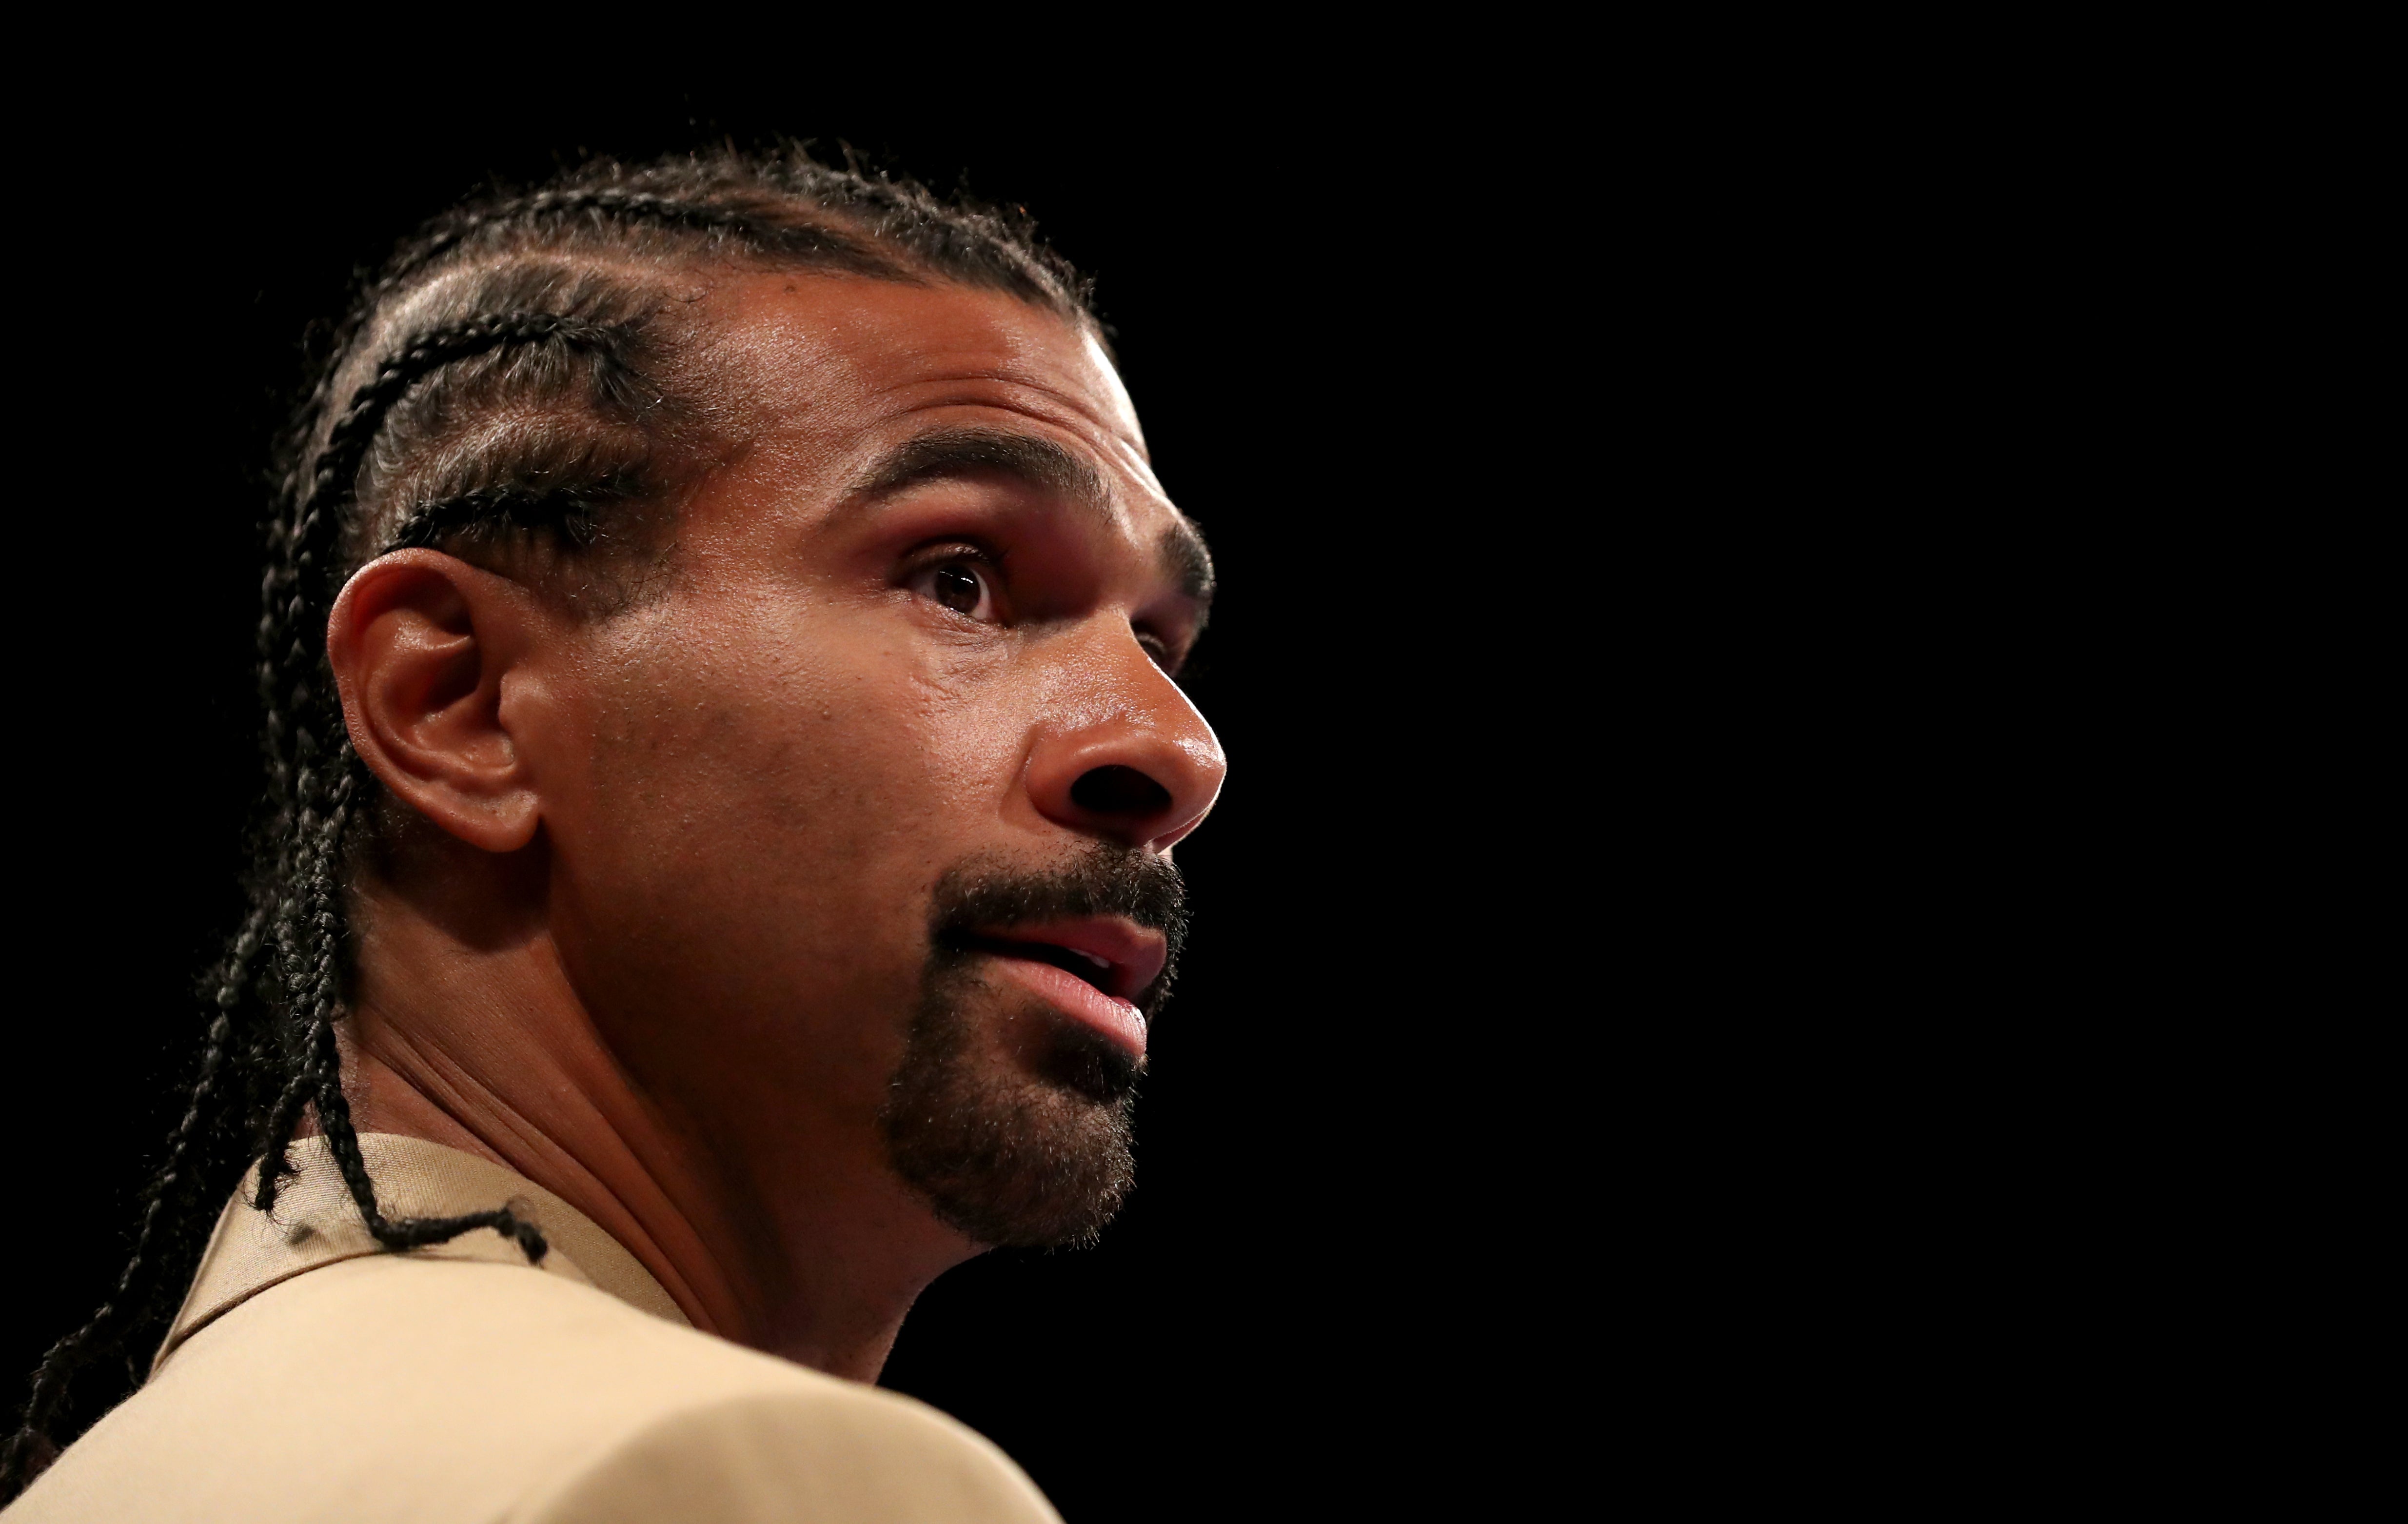 Haye was charged with assault following the incident